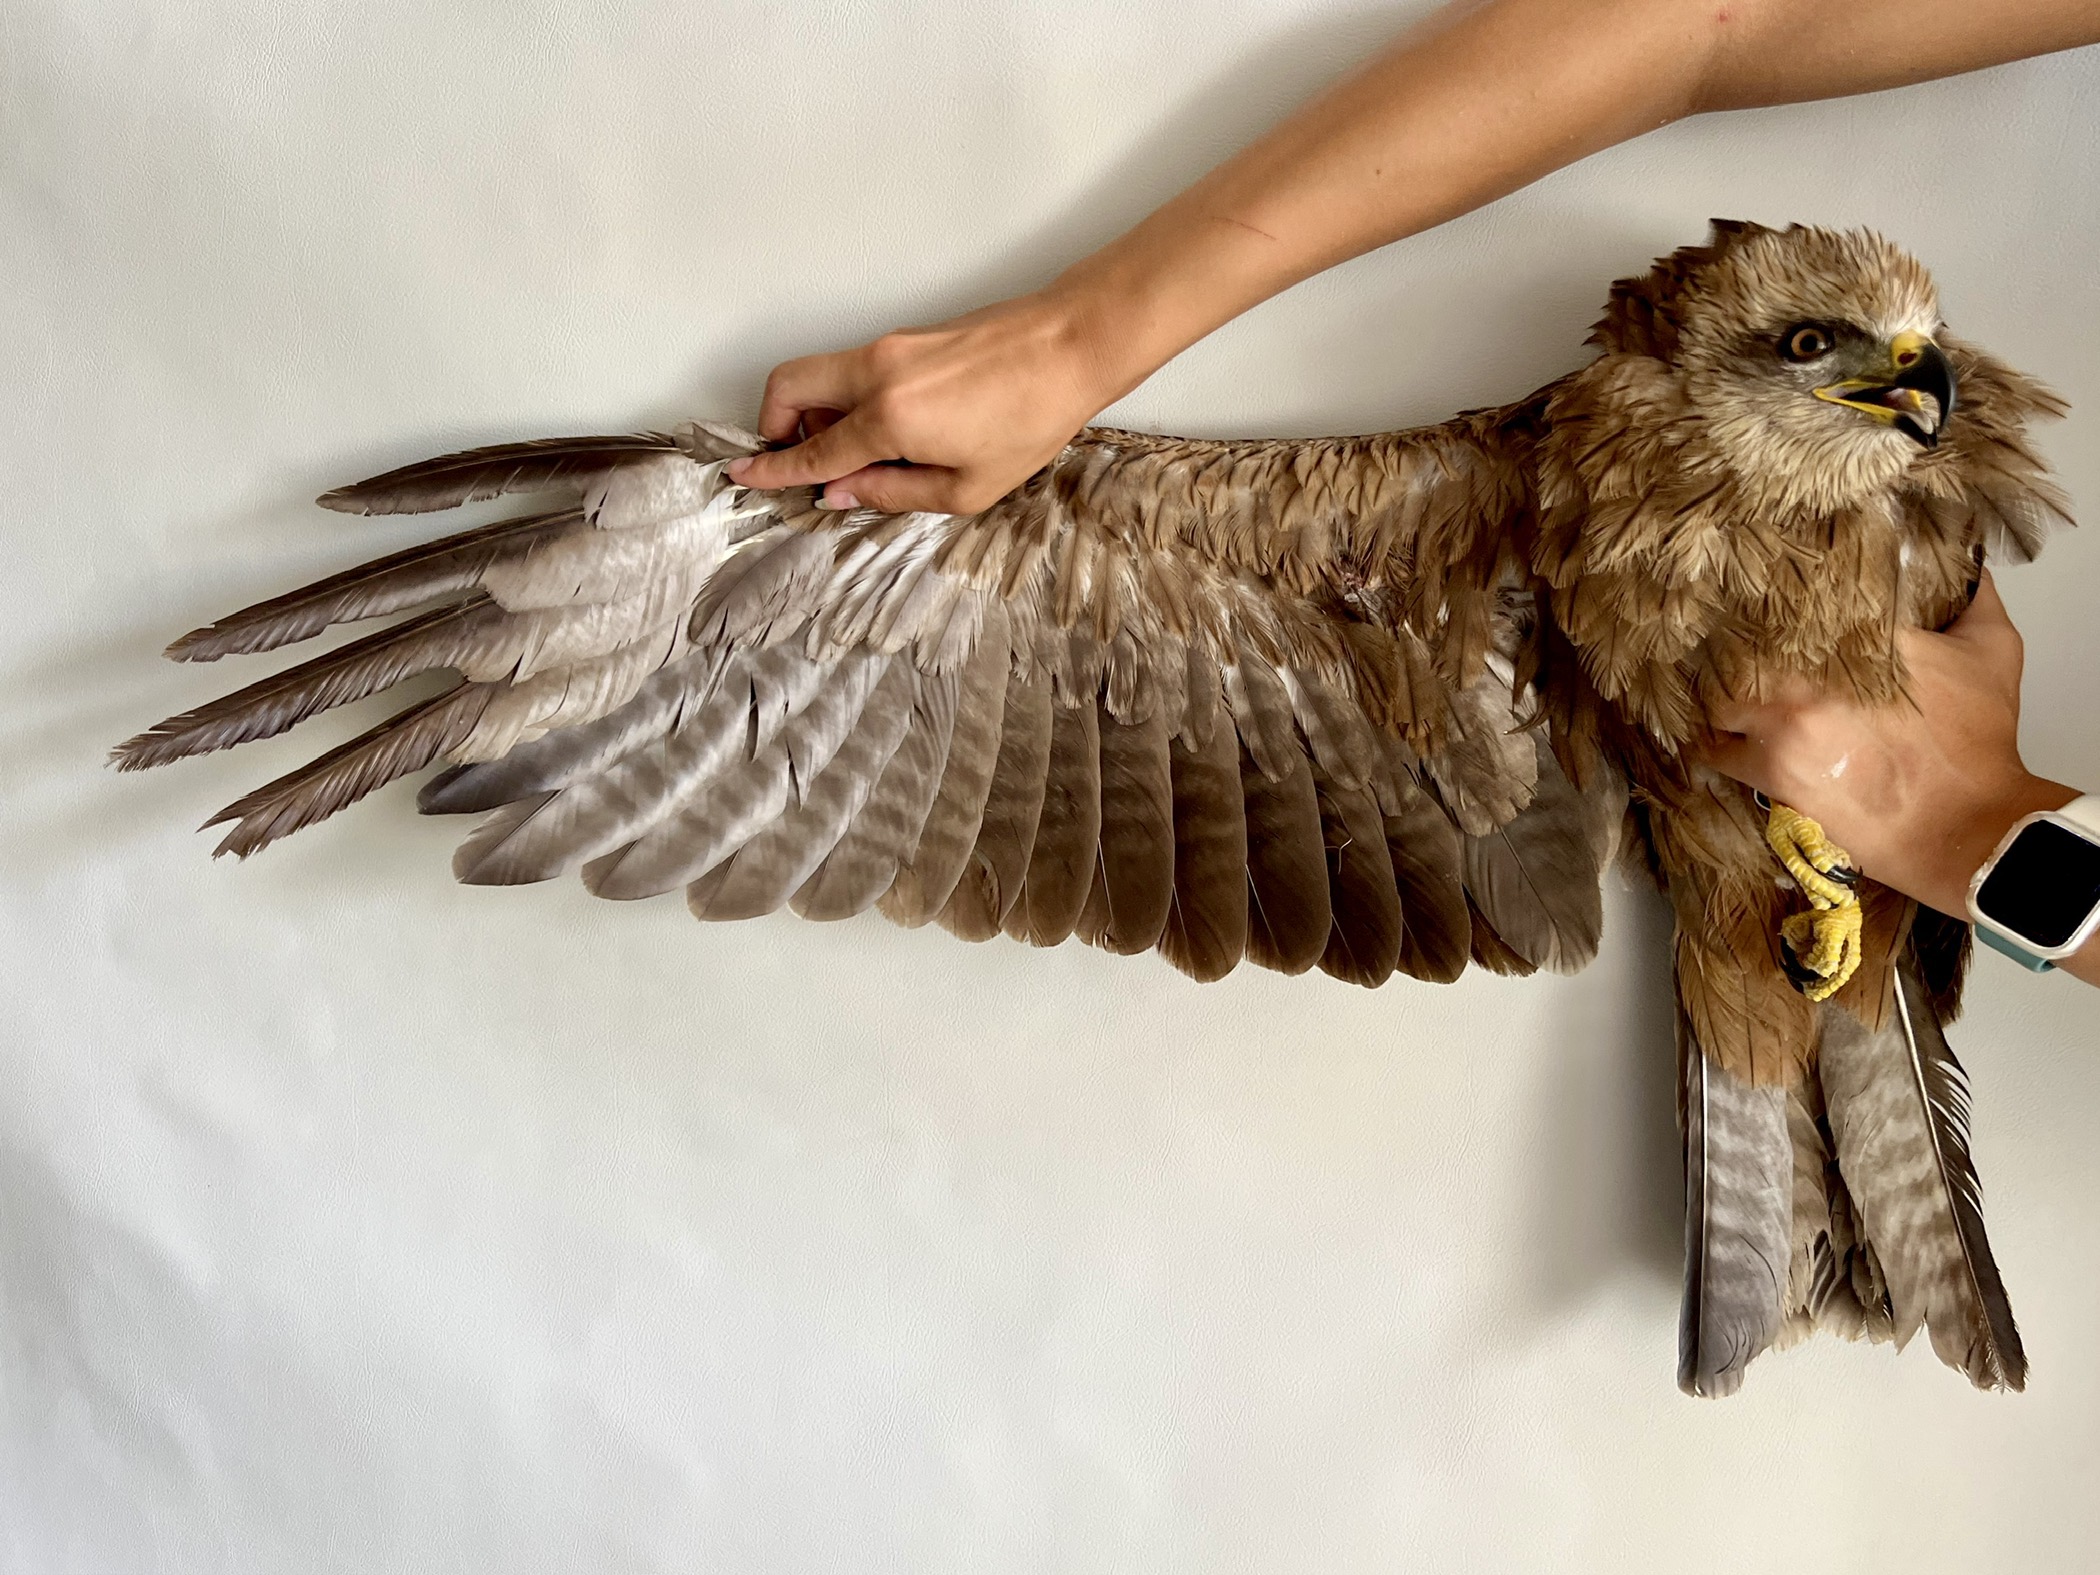 a biologists hands hold a black kite, grasping the talons and body in one hand, and the outstretched wing in the other. The bird is held in front of a white backdrop and in a standardized way to show its flight feathers for documentation purposes